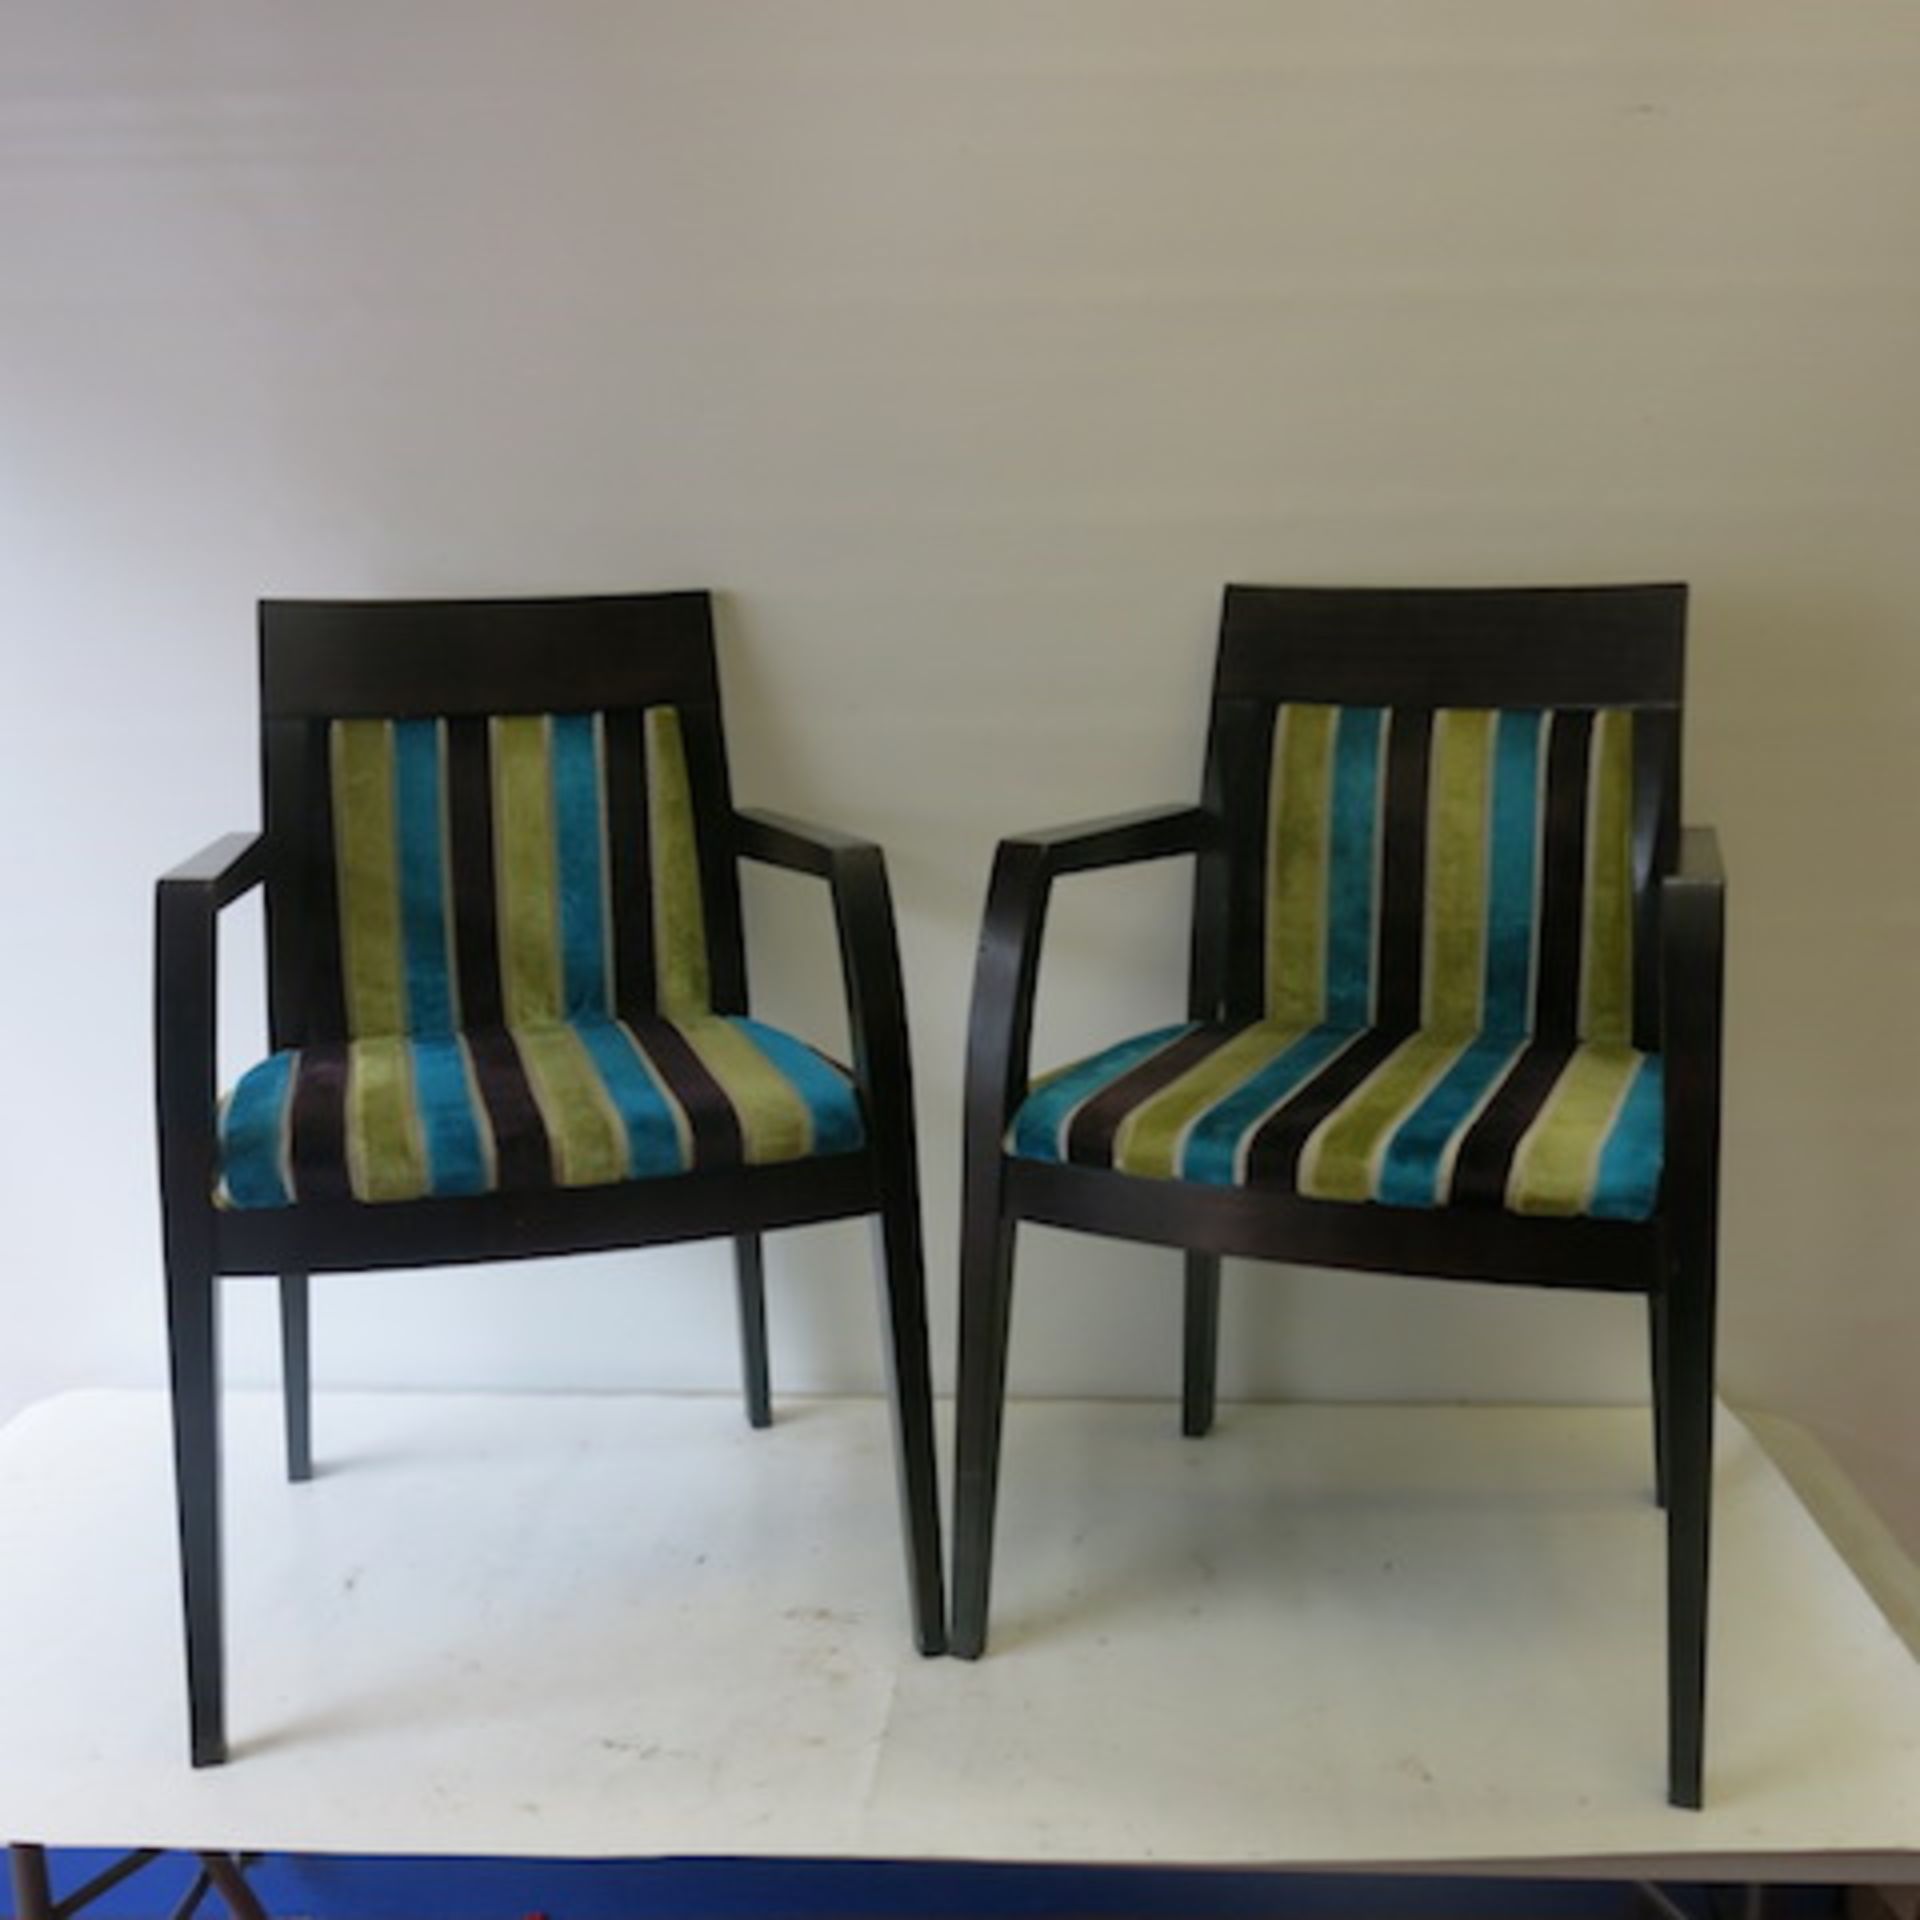 2 x Wooden Framed Dining Chairs with Striped Velour Pattern. Light stains to one seat, but still